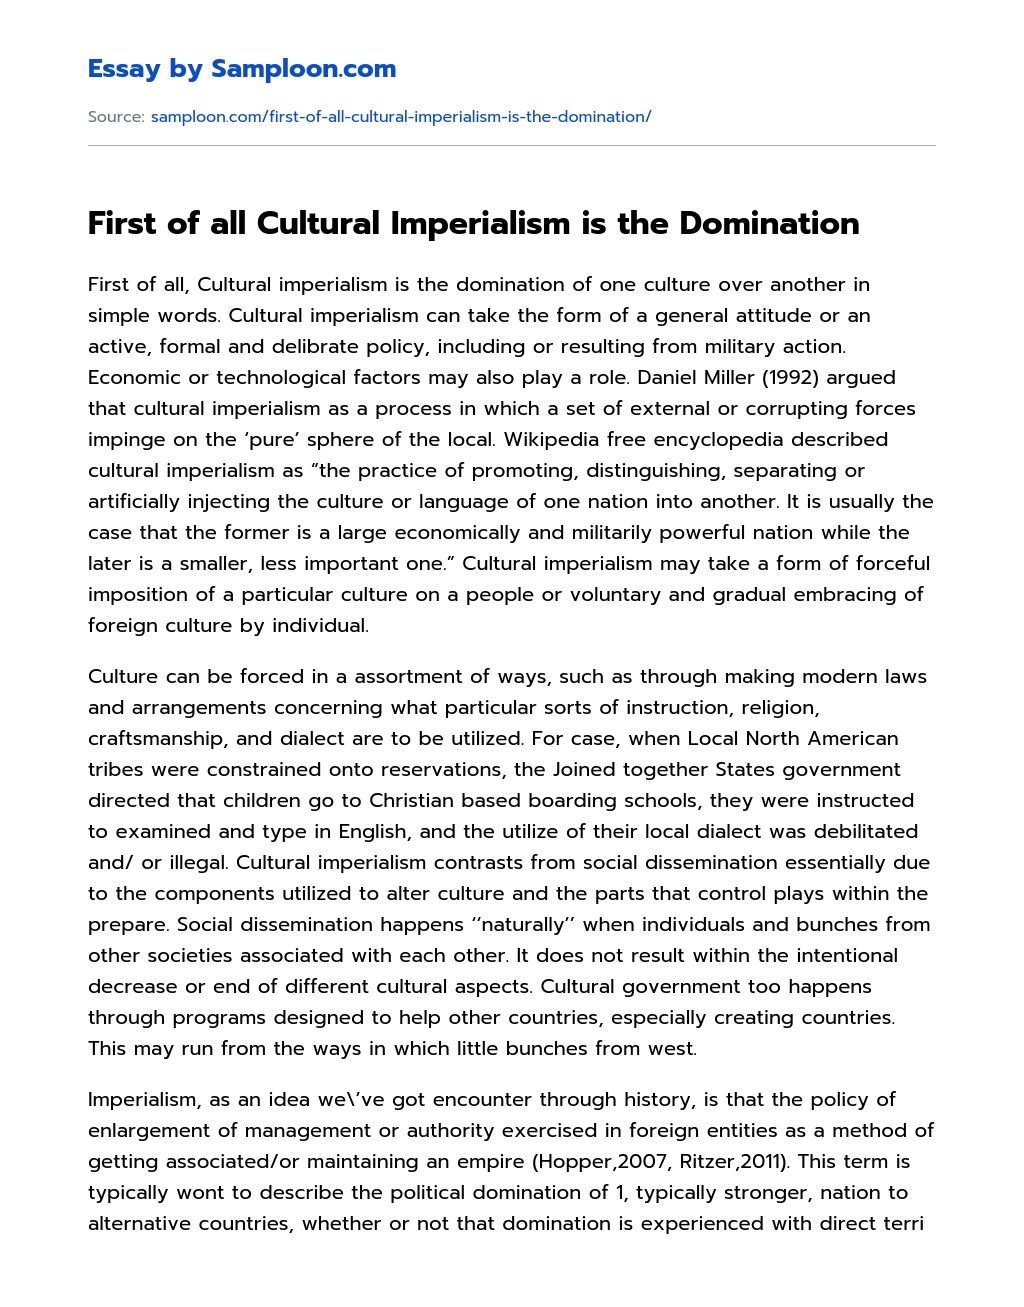 First of all Cultural Imperialism is the Domination essay